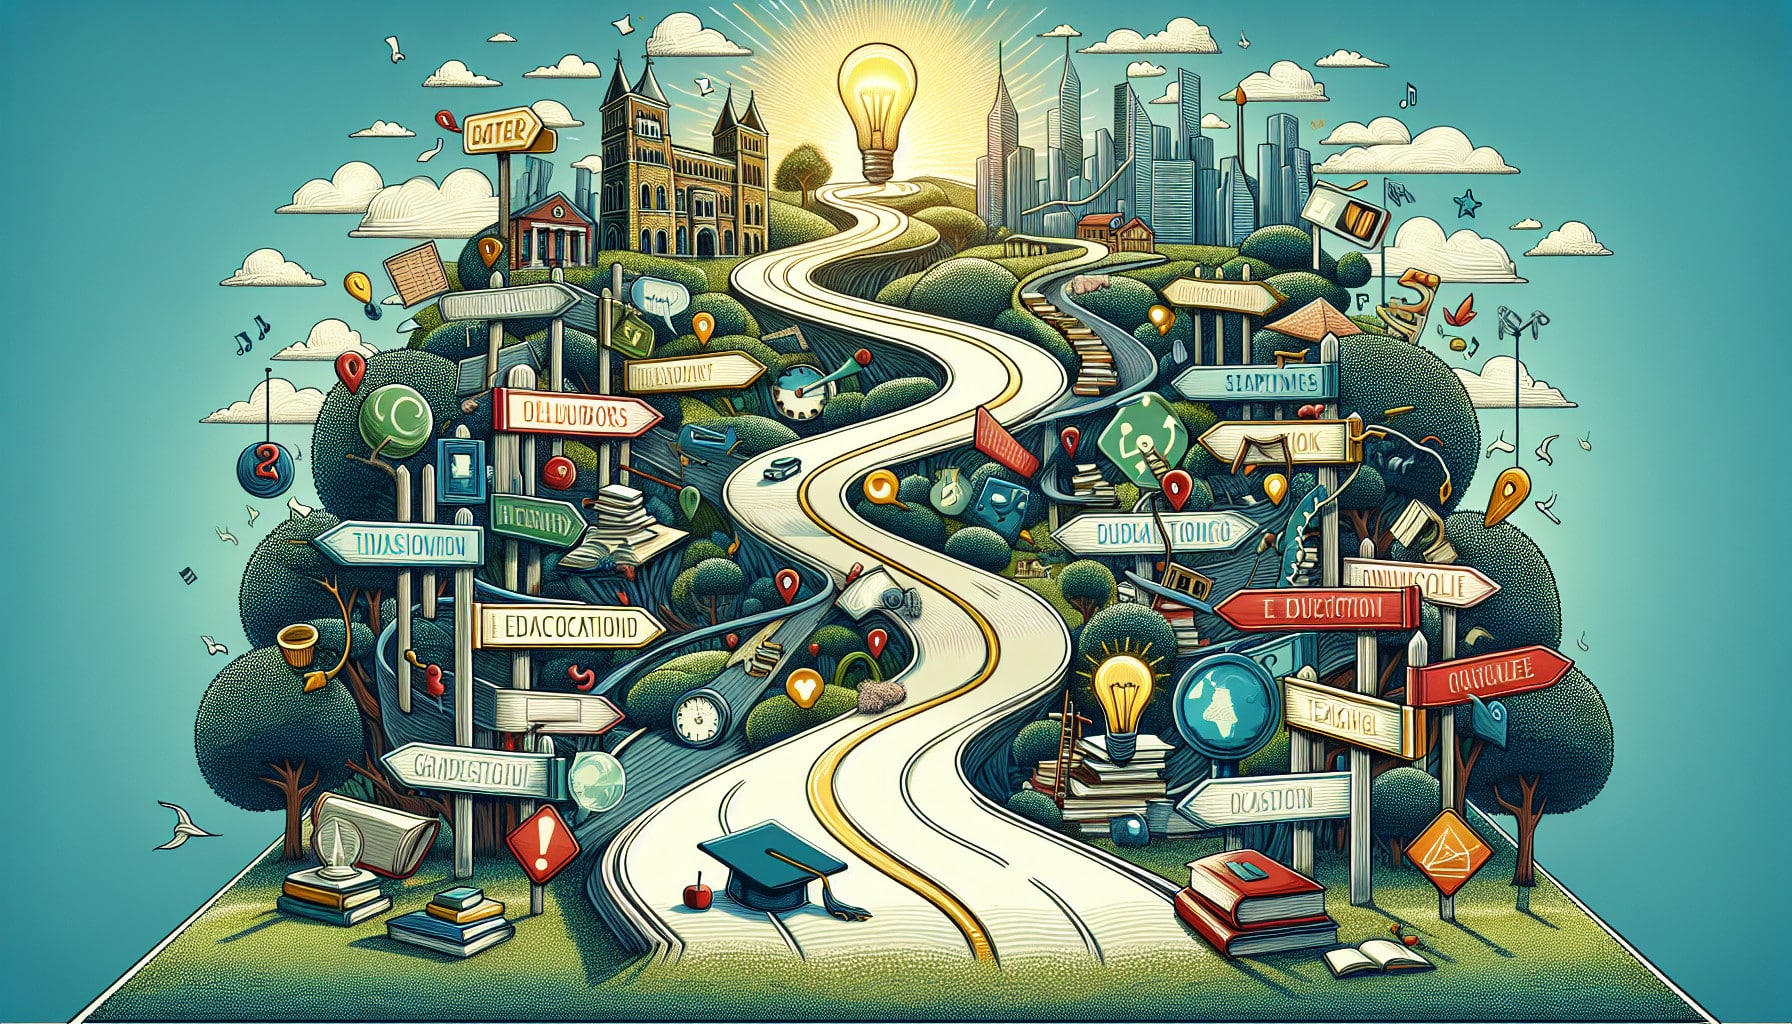 A colorful illustration of a winding road symbolizing the teaching journey